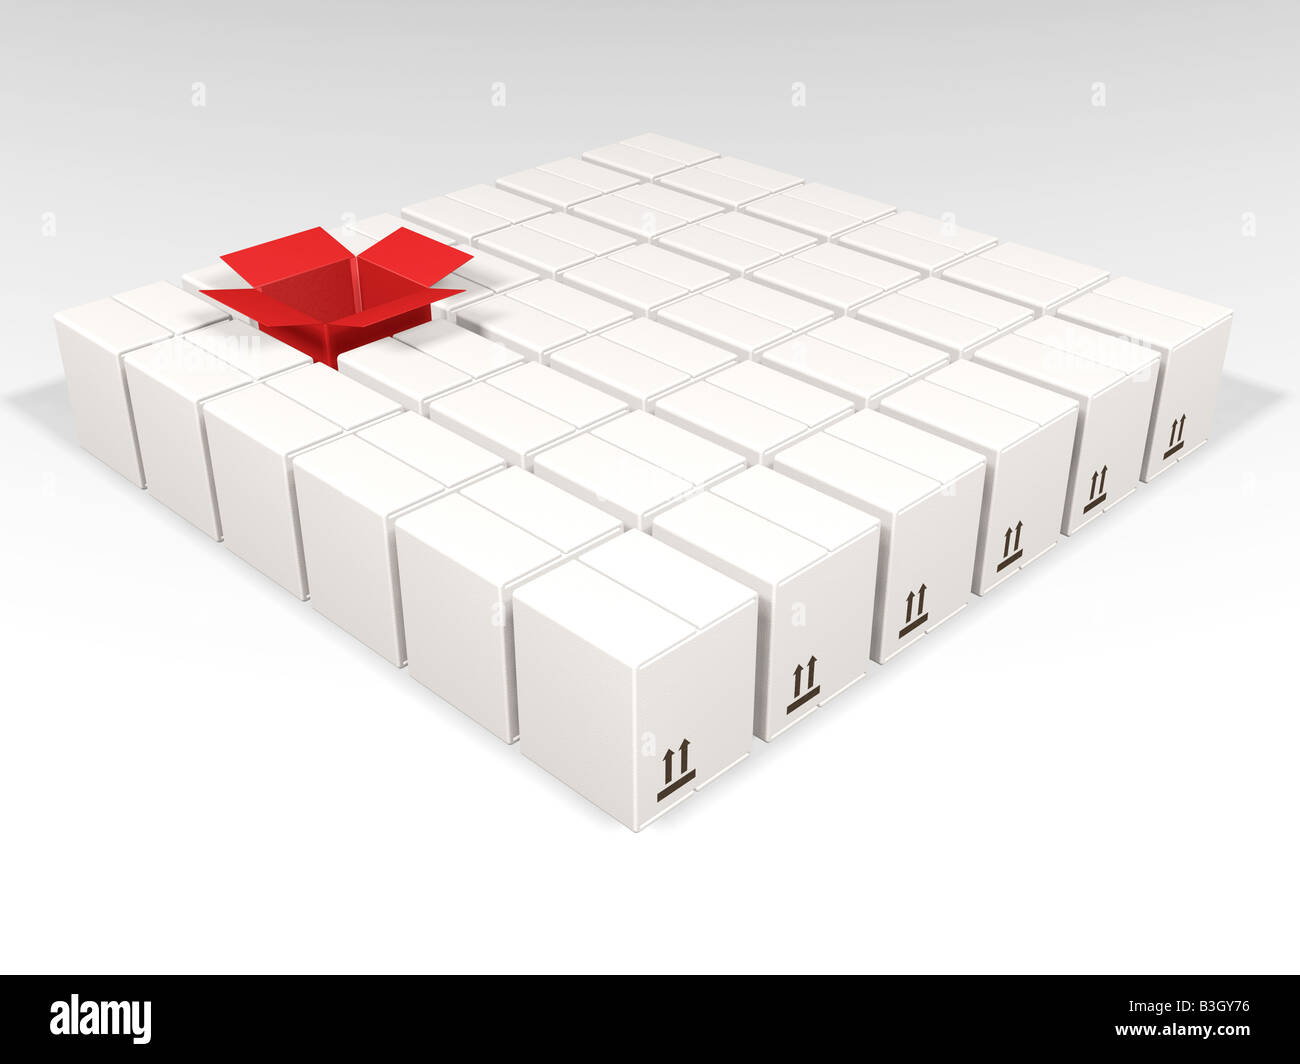 One open red box amongst many white boxes Stock Photo